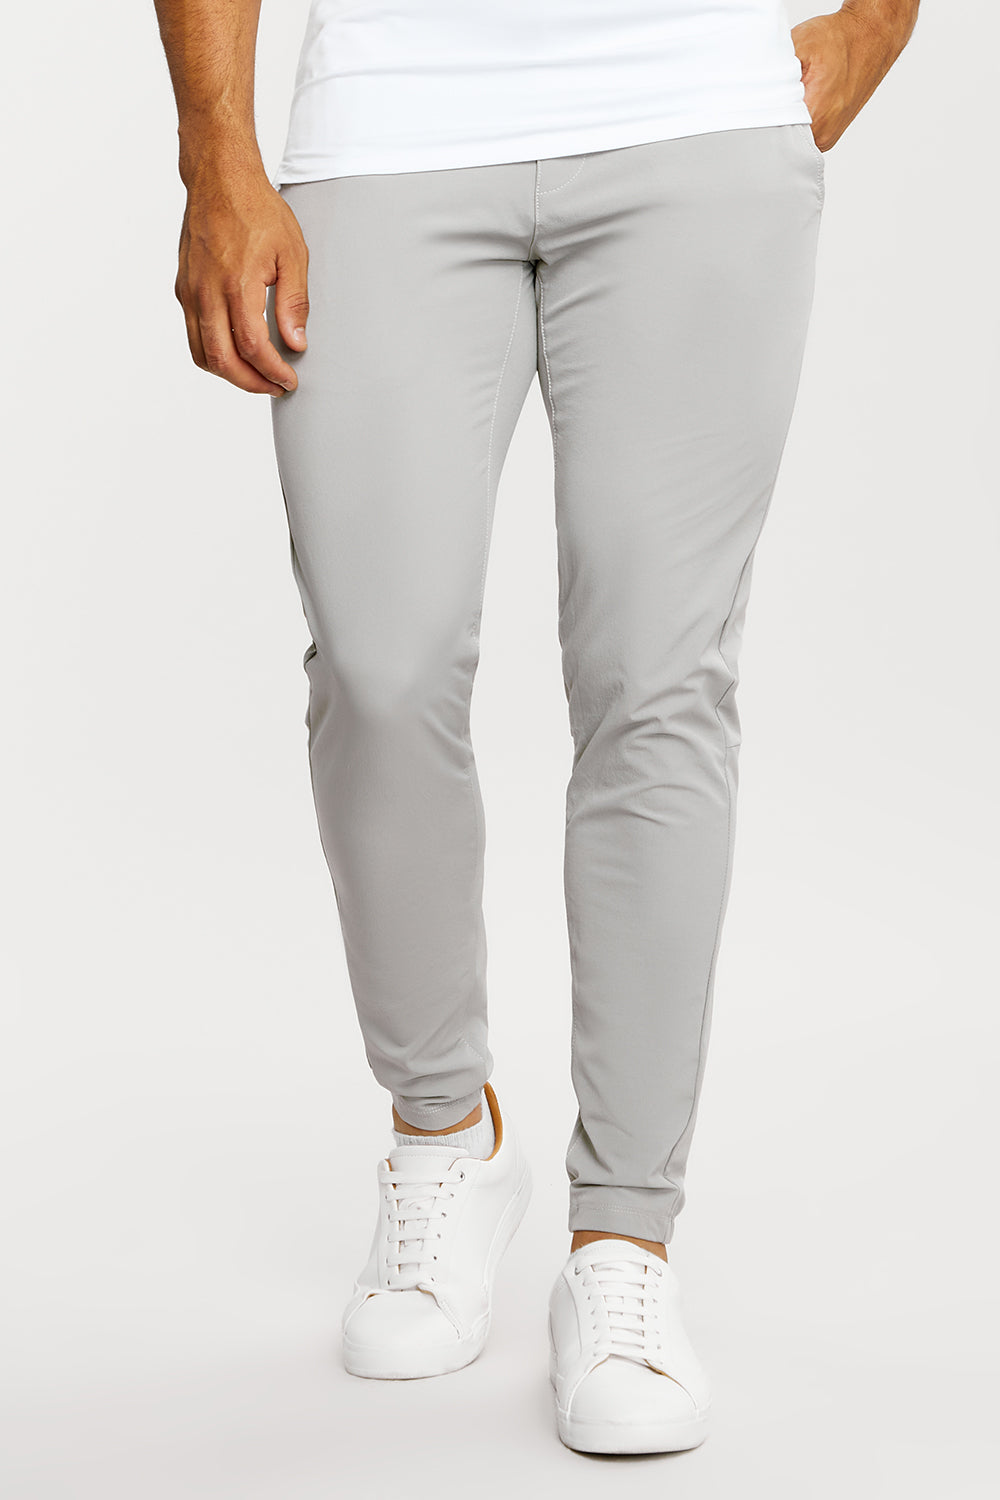 Twill Trousers in Smoke Grey - TAILORED ATHLETE - ROW